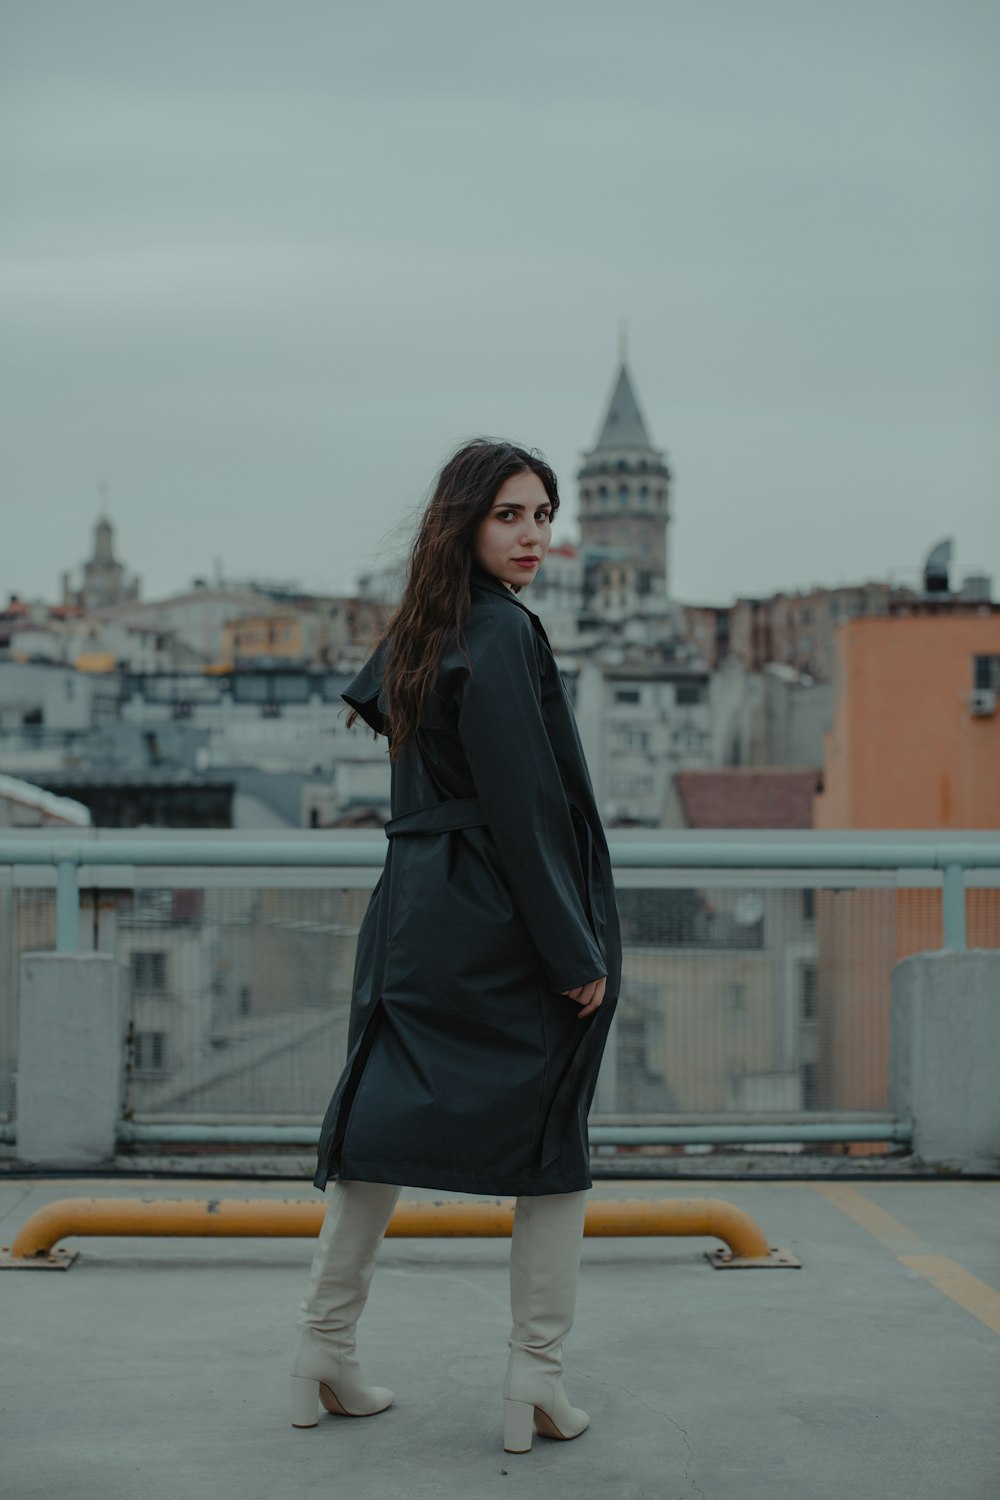 woman in black coat standing on yellow railings during daytime